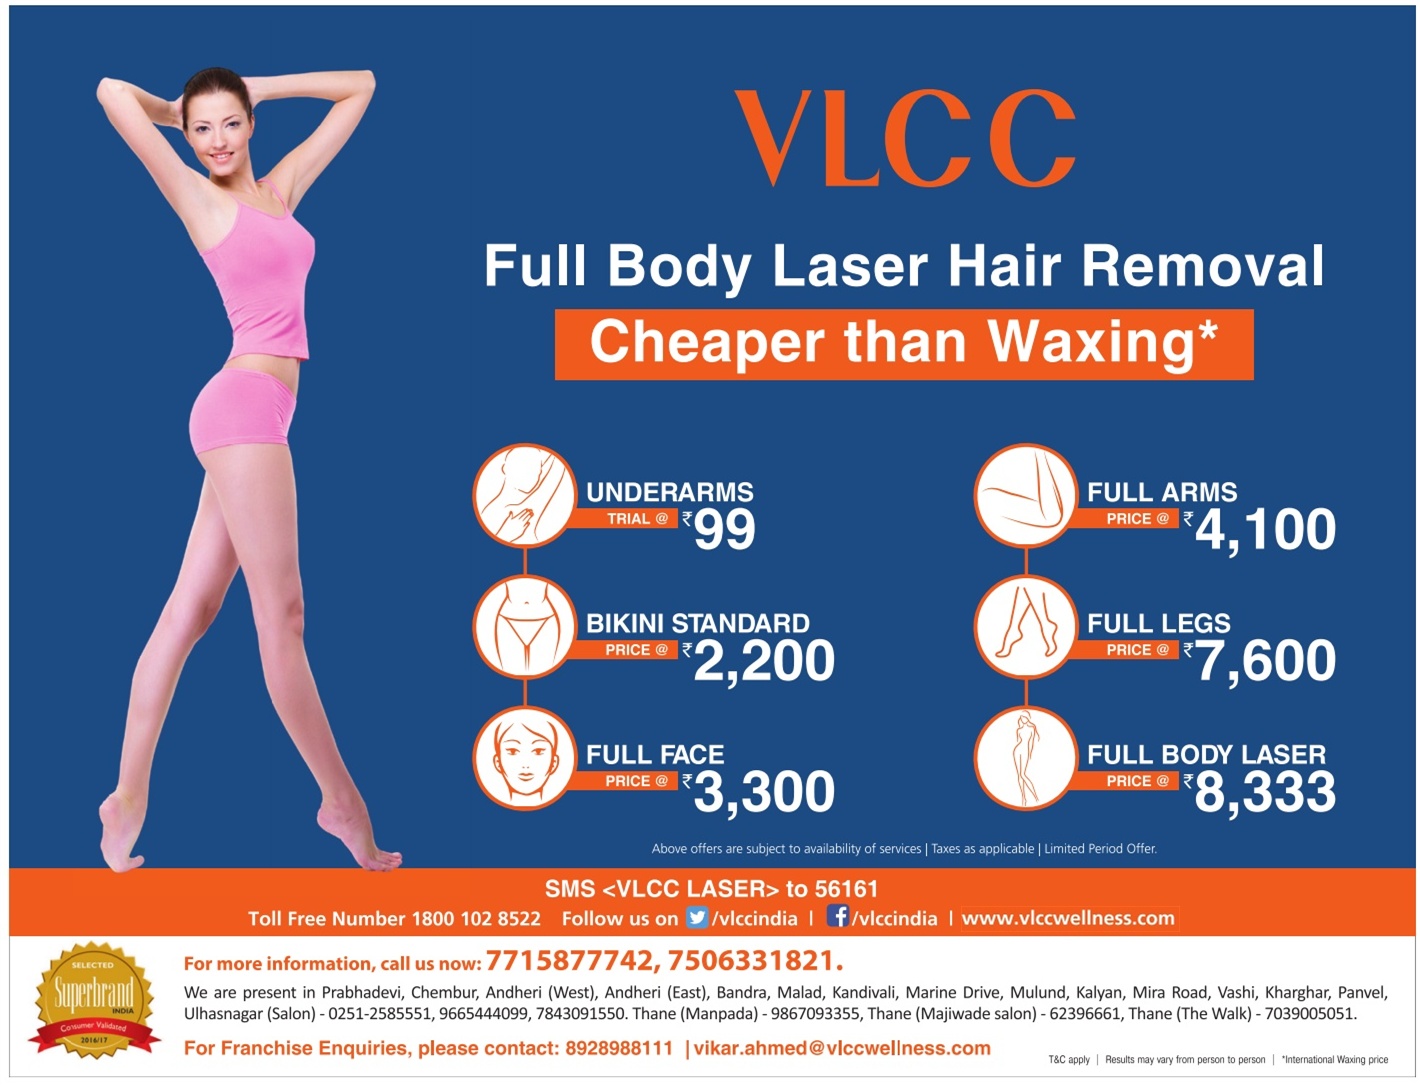 Vlcc Full Body Laser Hair Removal Cheaper Than Waxing Ad - Advert Gallery